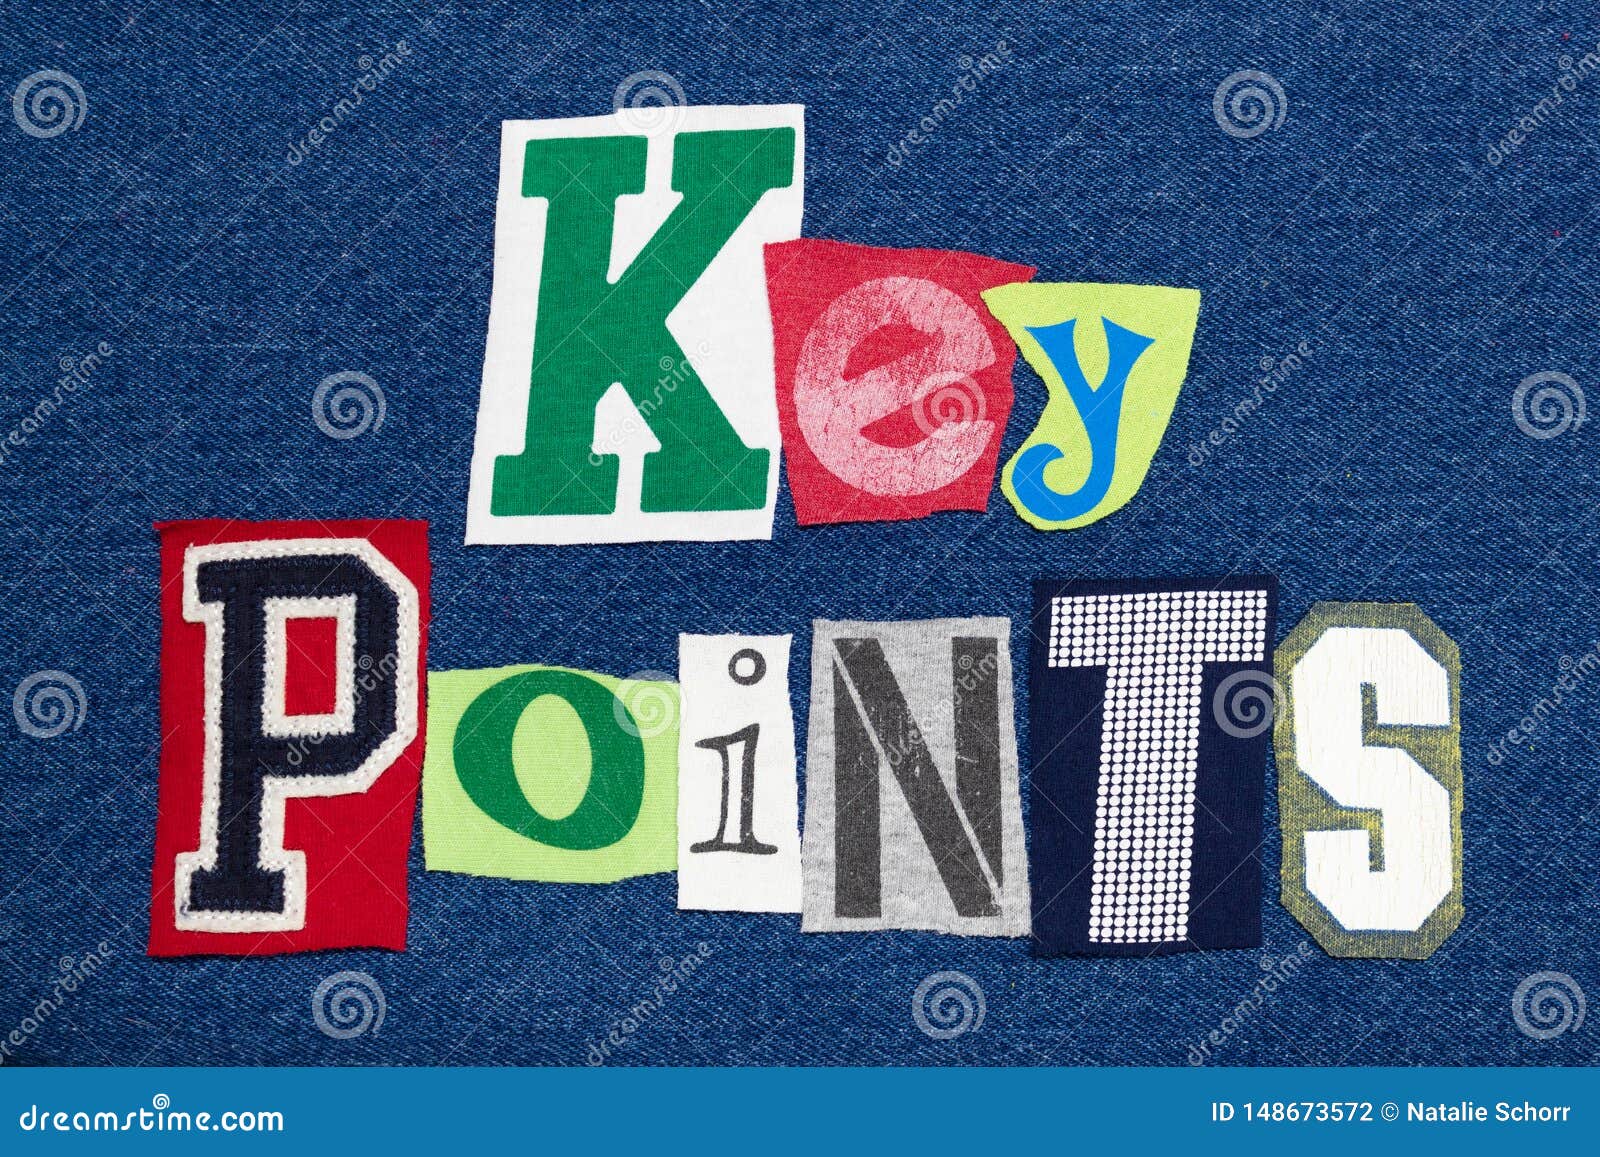 key points text word collage colorful fabric on denim, presentation summary